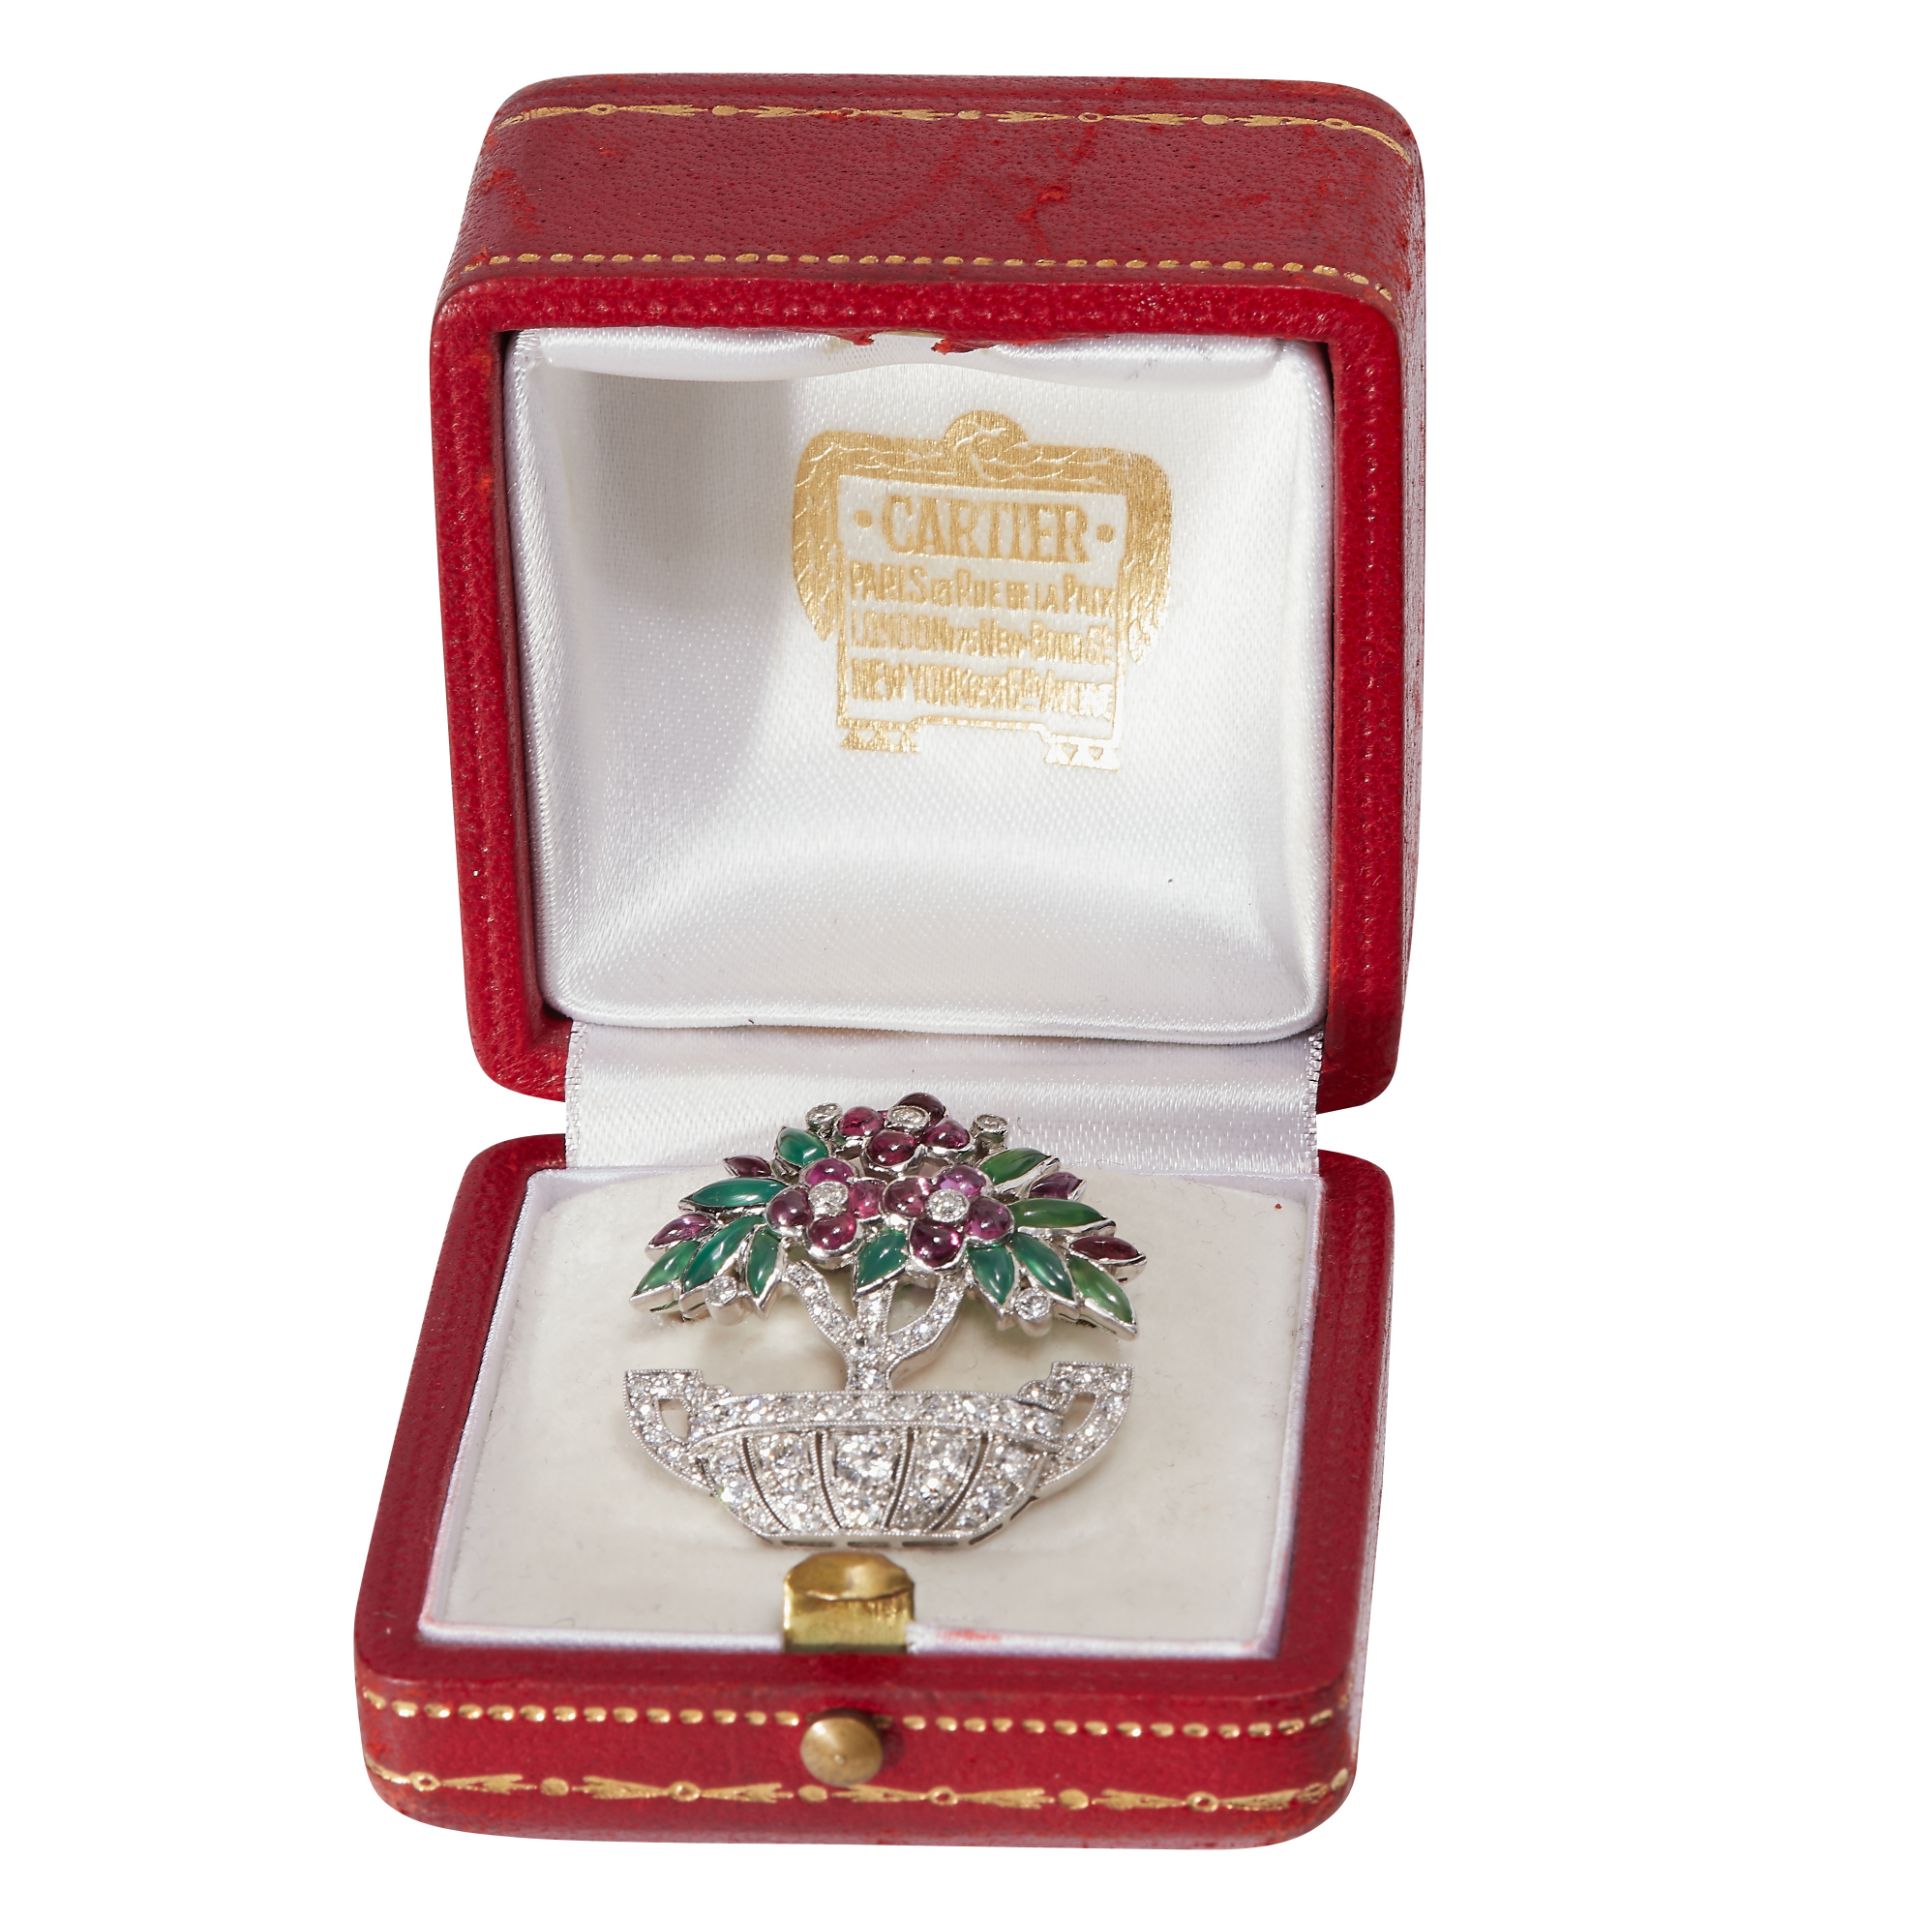 CARTIER, IMPORTANT ART-DECO DIAMOND, RUBY AND JADE FLORAL BROOCH - Image 2 of 3